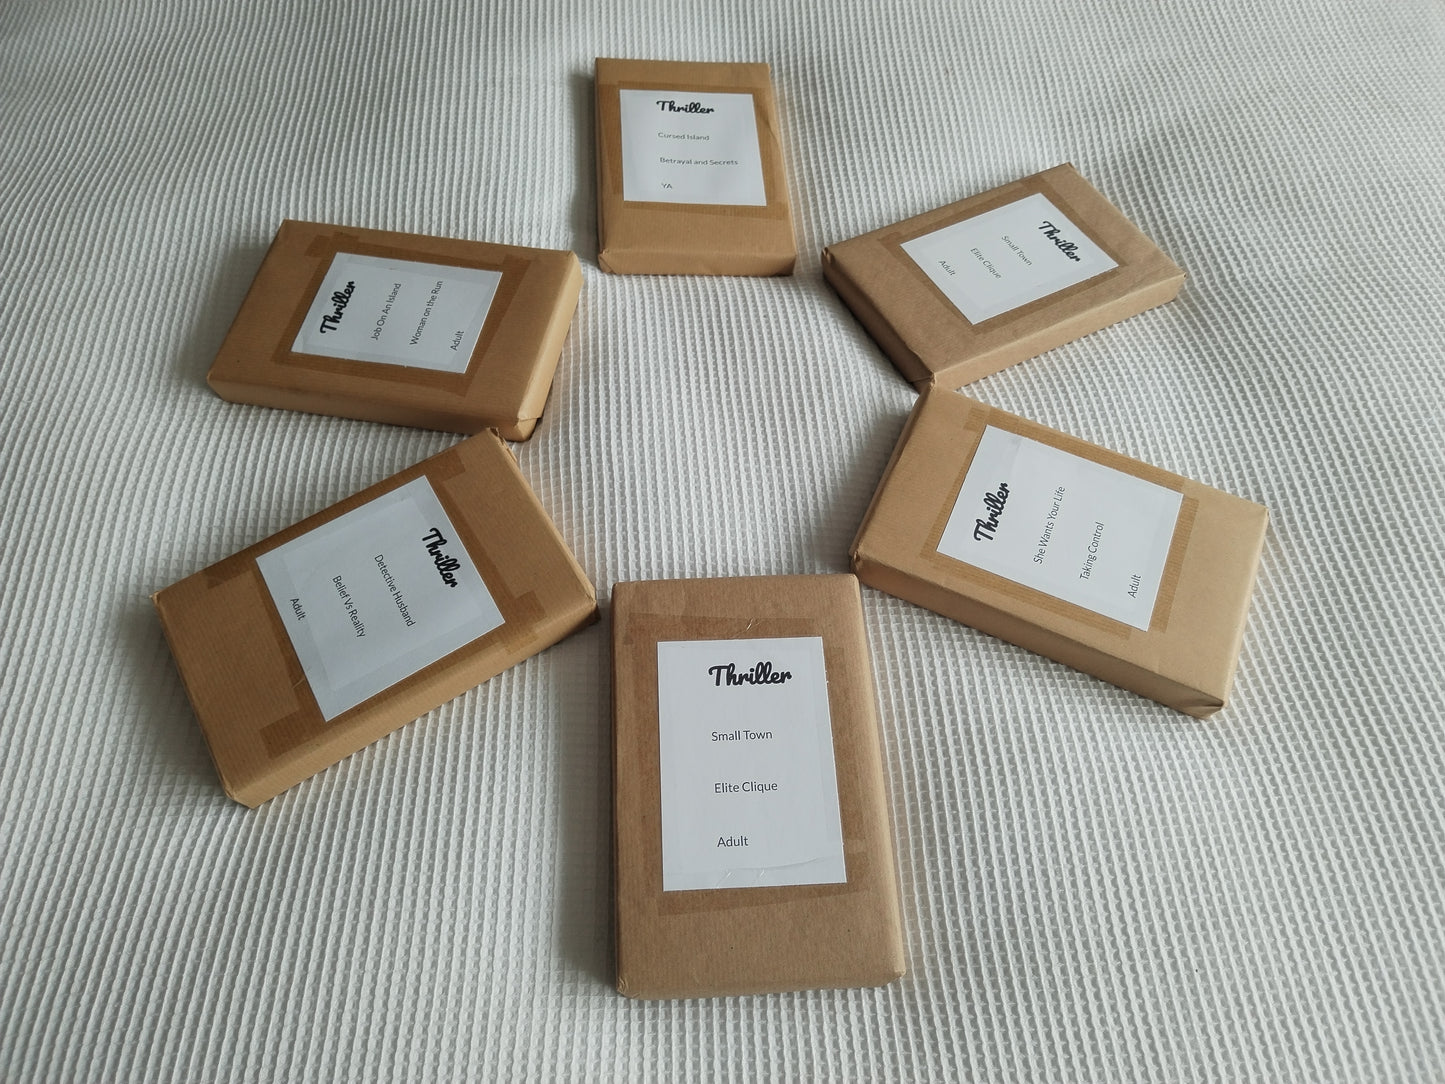 (NEW and PREOWNED CONDITION) 5 Bookish Blind Dates